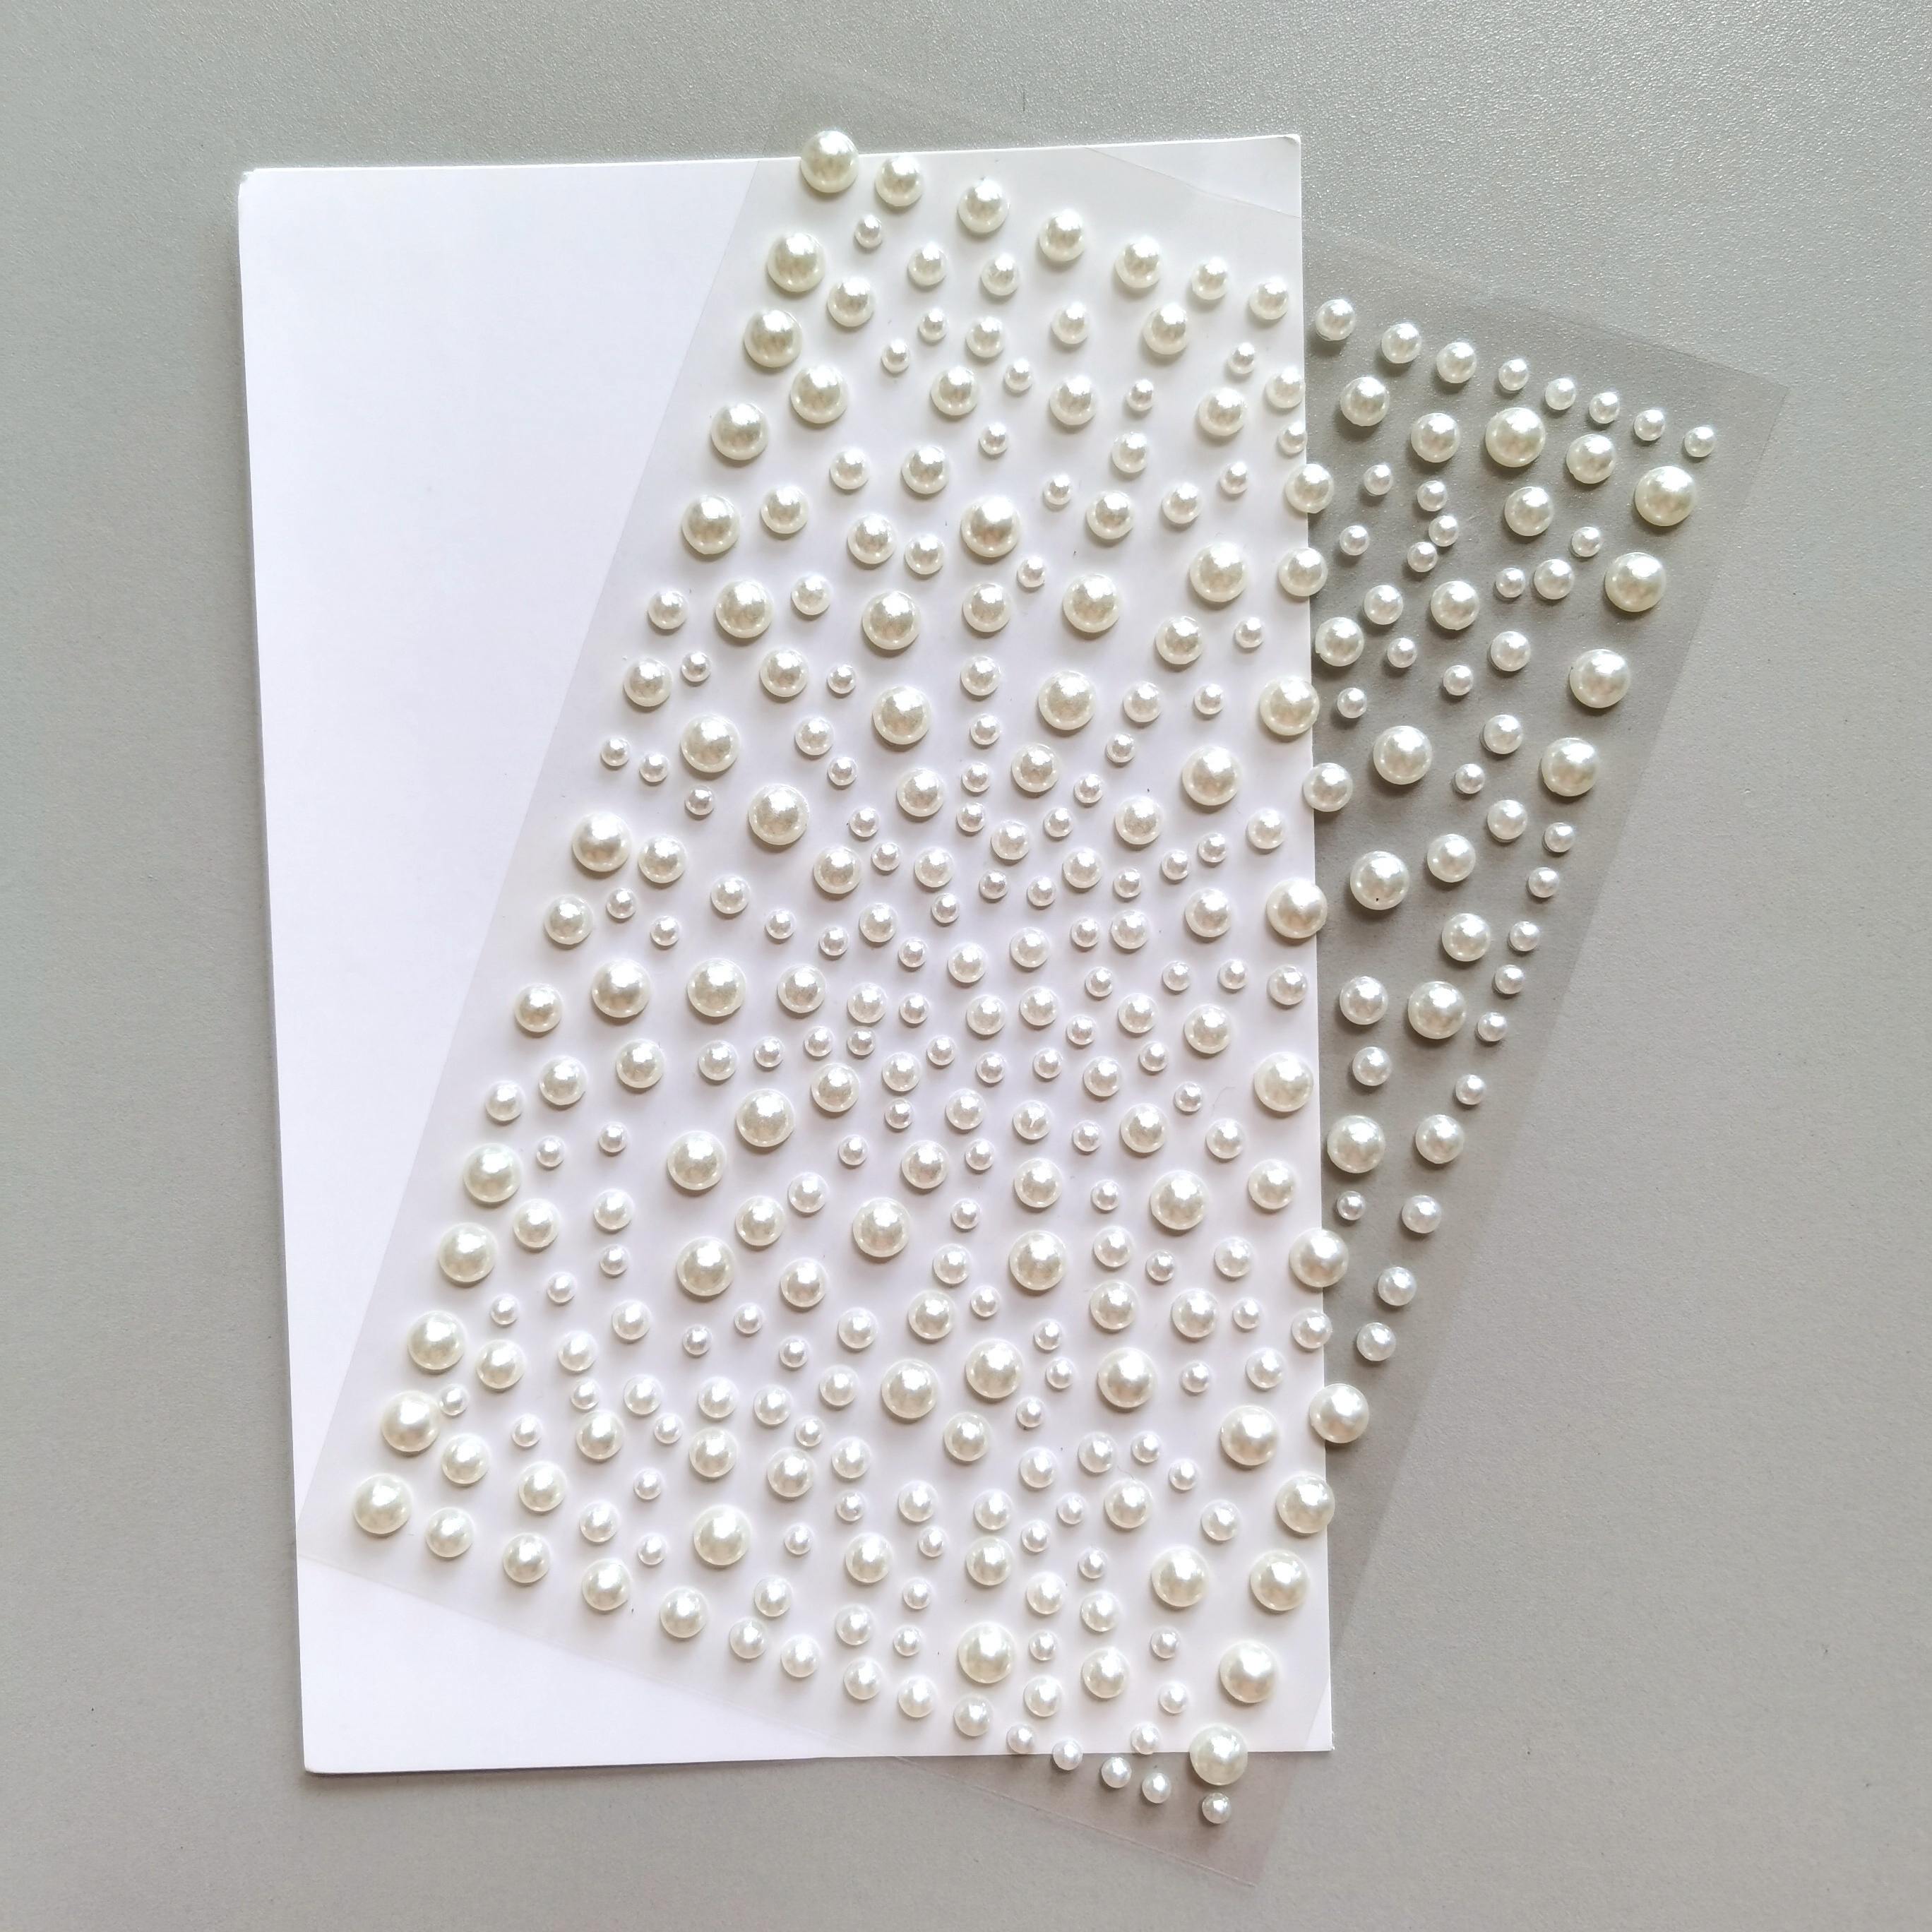 975 Pcs Of Pearl Stickers Self-Adhesive Decorative Stickers, Face